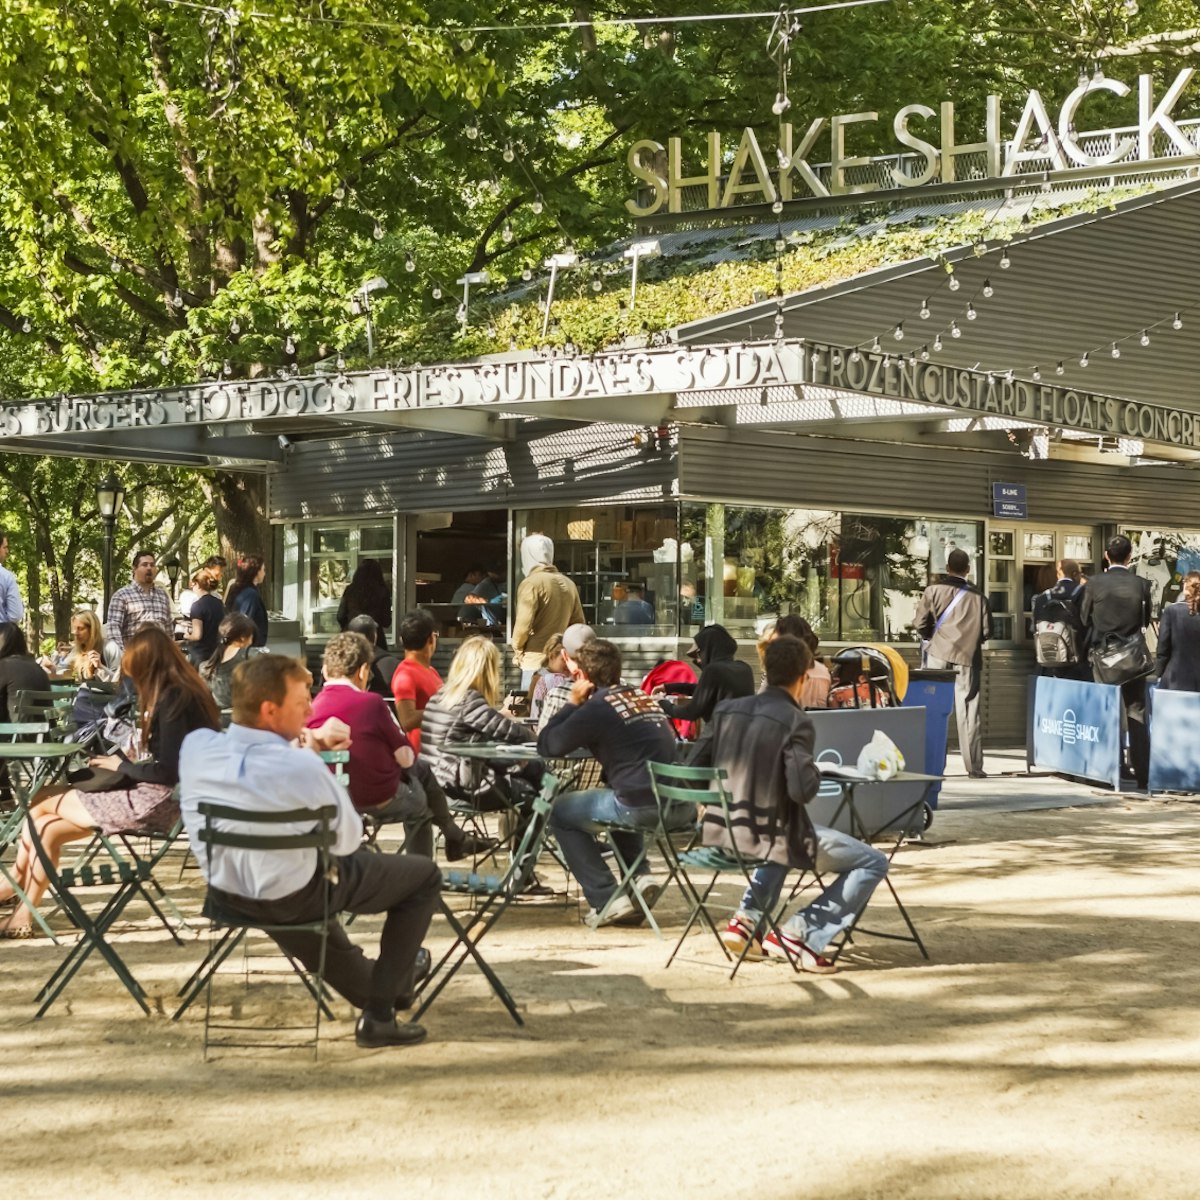 New York, New York, USA - May 12, 2011: Shake Shack in Madison Square Park in New York City is known for quality "fast food". It is also known for the long lines of people waiting to order.; Shutterstock ID 315279176; Your name (First / Last): Lauren Gillmore; GL account no.: 56530; Netsuite department name: Online-Design; Full Product or Project name including edition: 65050/ Online Design /LaurenGillmore/POI